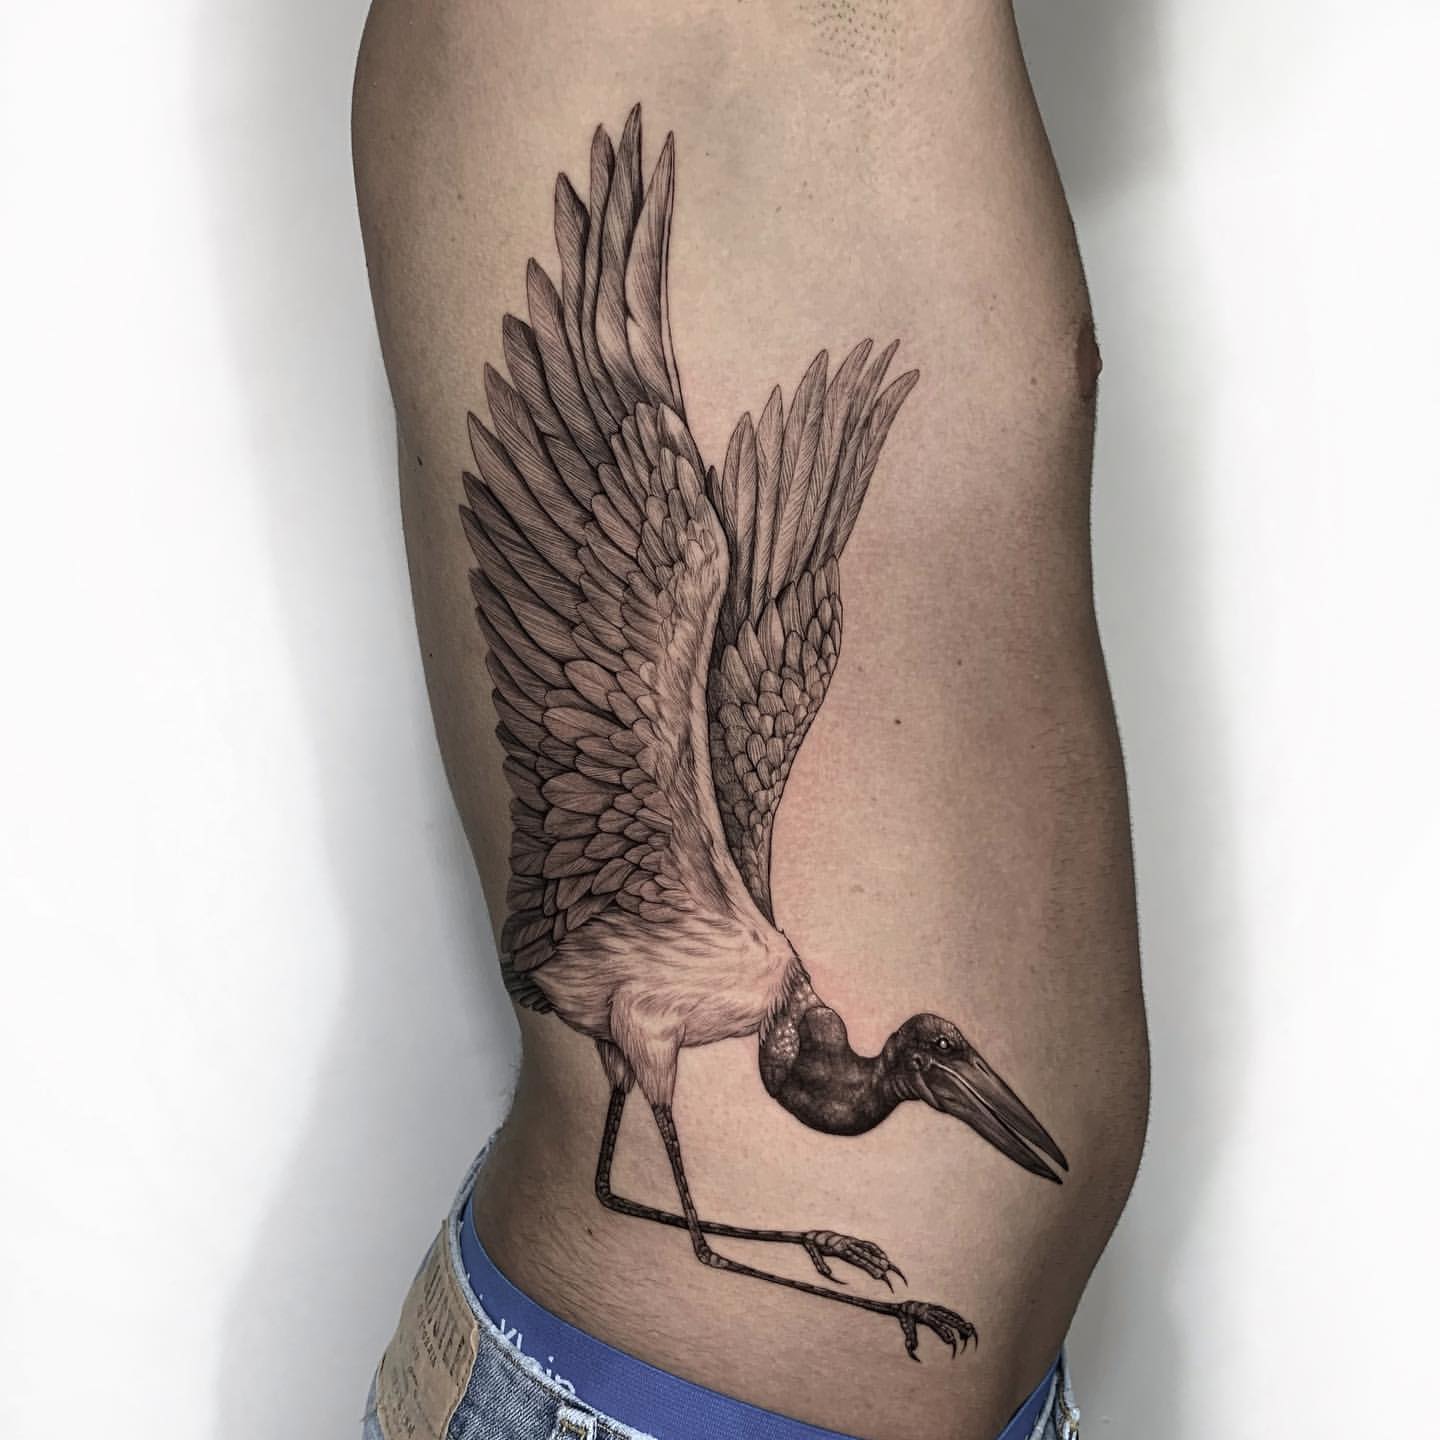 What do birds mean on a tattoo? - Quora